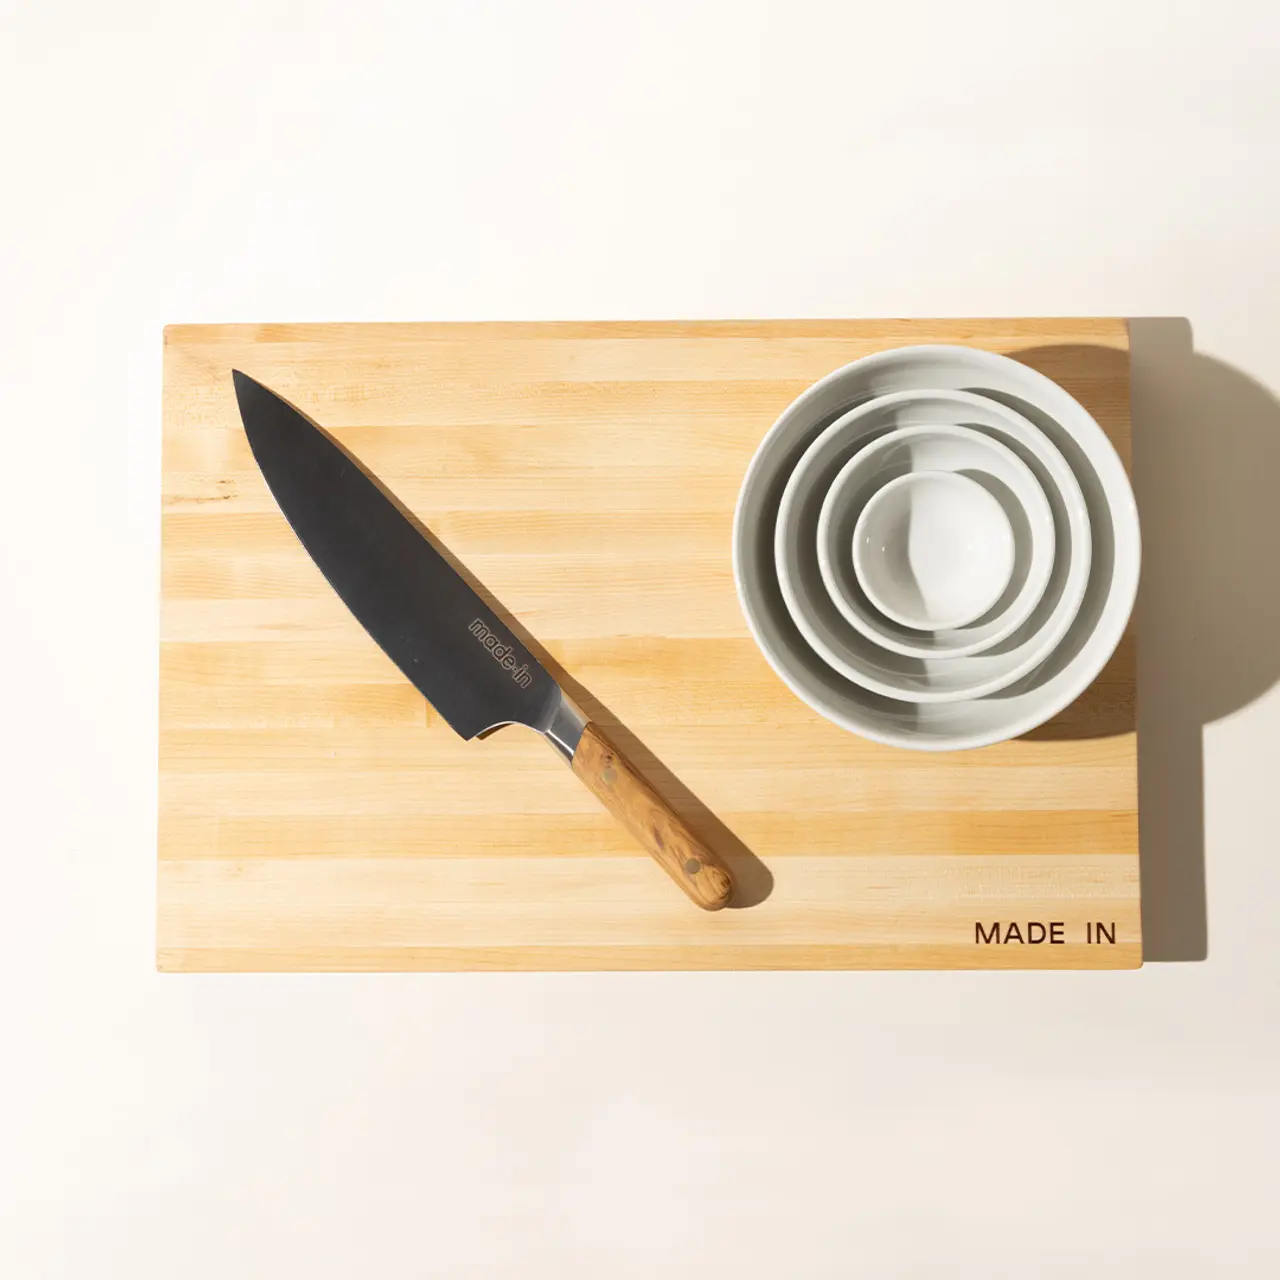 A chef's knife and a stack of white bowls are neatly placed on a bamboo cutting board under bright lighting.